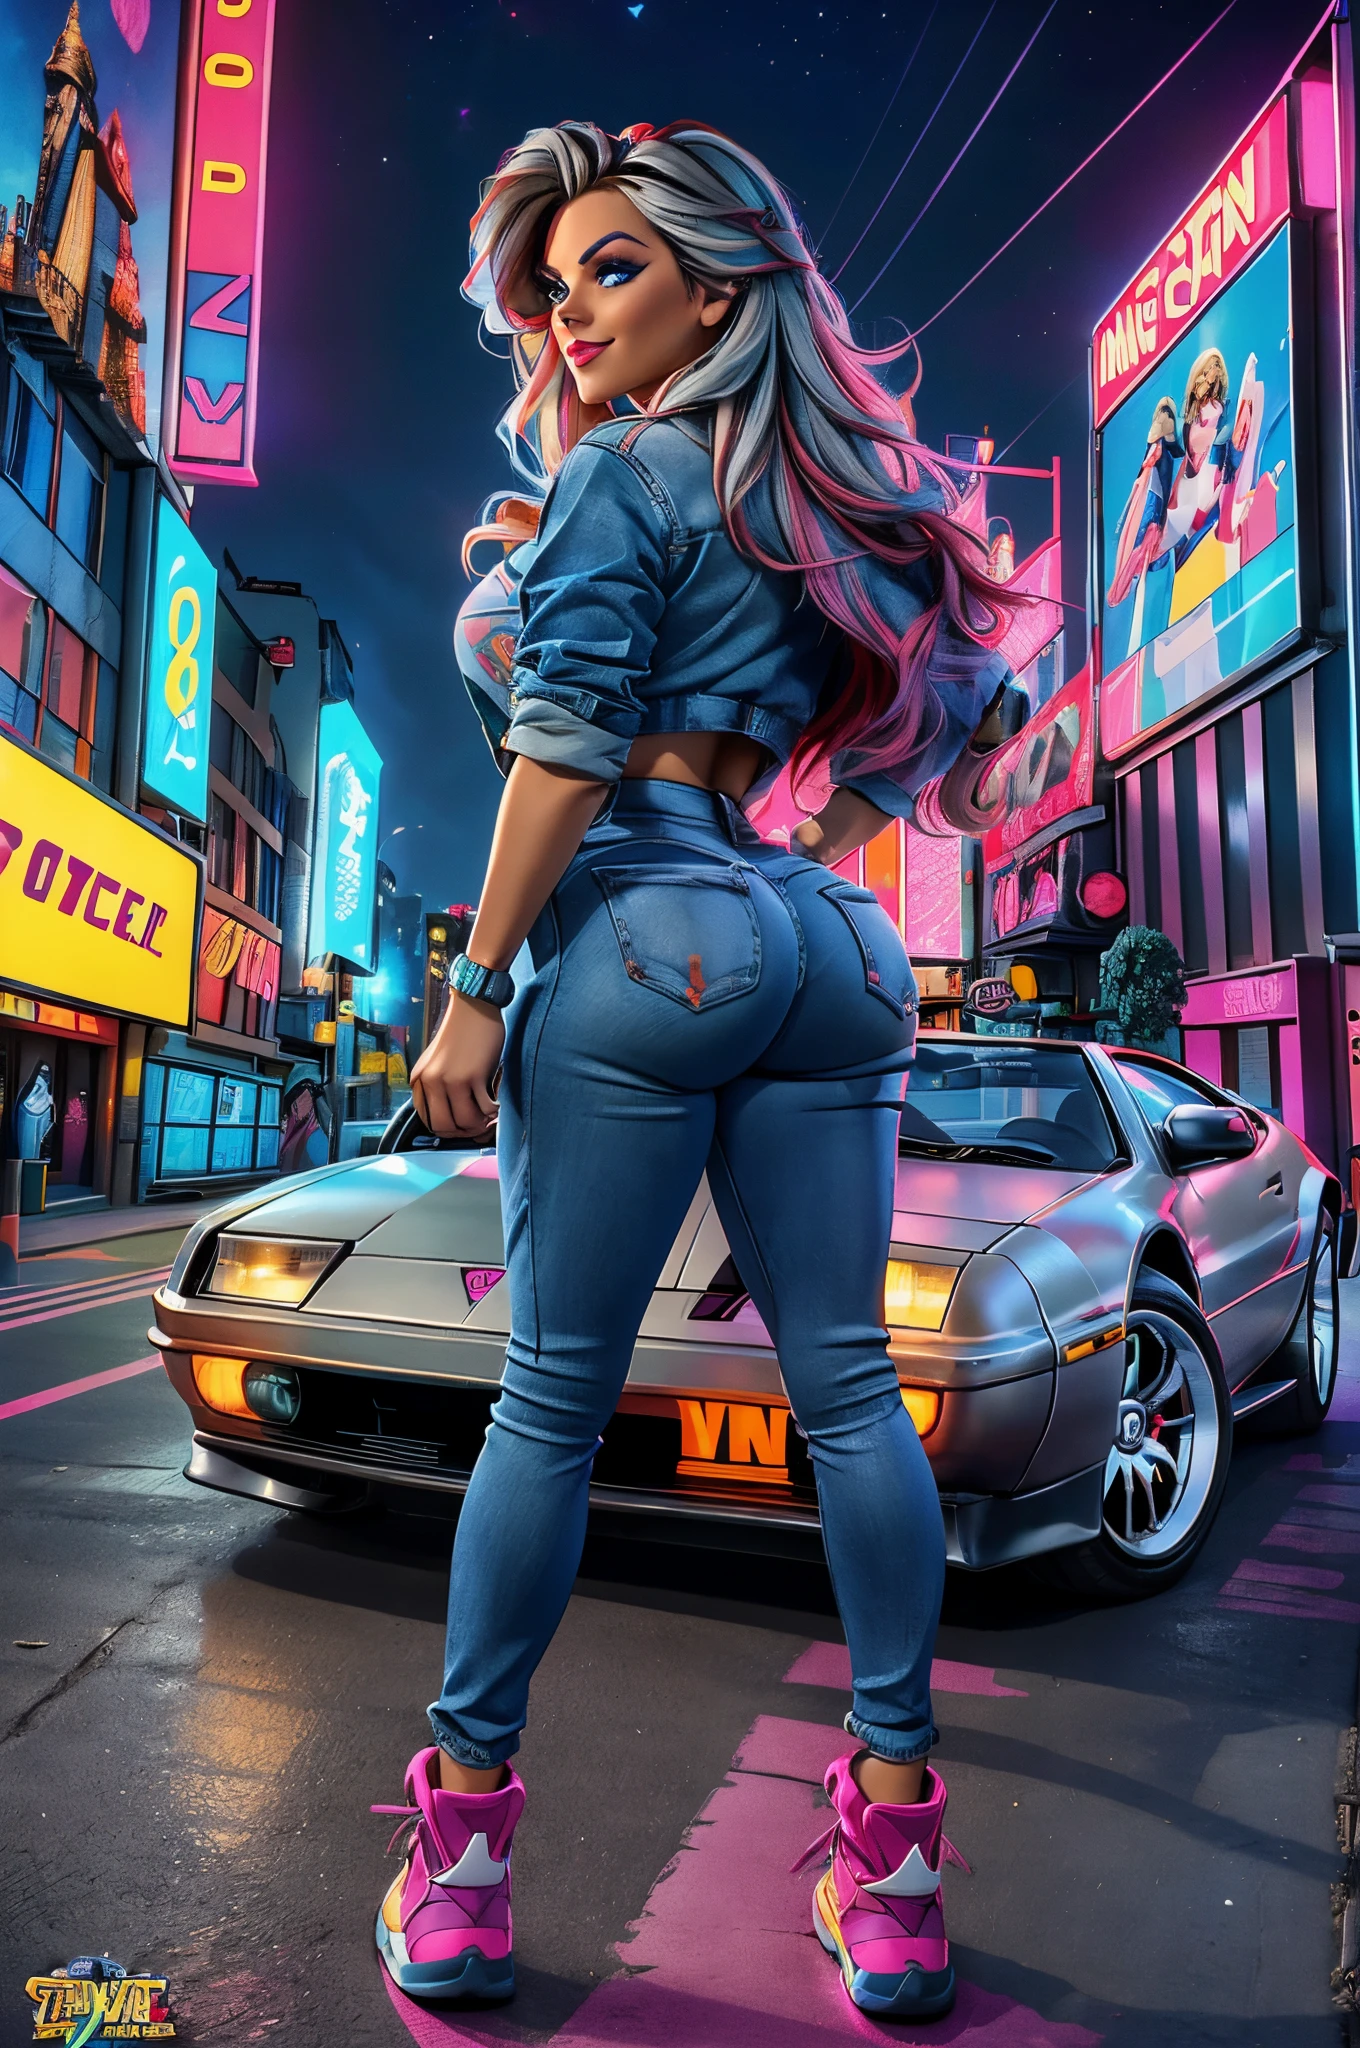 (best quality,4k,highres:1.2),ultra-detailed,(realistic:1.37),an attractive girl traveling through time in a vibrant 1990's scene,detailed eyes and face,longeyelashes, tight distressed jeans, watch on wrist and is viewable the the viewer, ((((really long legs)))), ample shapely backside, 90s hairstyle,stylish outfit,wide smile,bright red lipstick,blue eyes, stylish colorful hair, standing in front of a shiny silver Delorean,time-traveling car, bright neon lights illuminating the surroundings,cityscape with tall buildings and bustling streets,graffiti-covered walls reflecting the urban culture,colorful street art in the background,retro arcade machines and posters lining the sidewalks,twinkling stars decorating the night sky,flashing billboard advertisements showcasing the latest '90s trends,a mix of vibrant colors and bold patterns,pop culture references scattered throughout the scene,"Back to the Future" movie references and easter eggs hidden in the environment. ((((Movie Poster)))), ((((stylish hightop tennis shoes))))